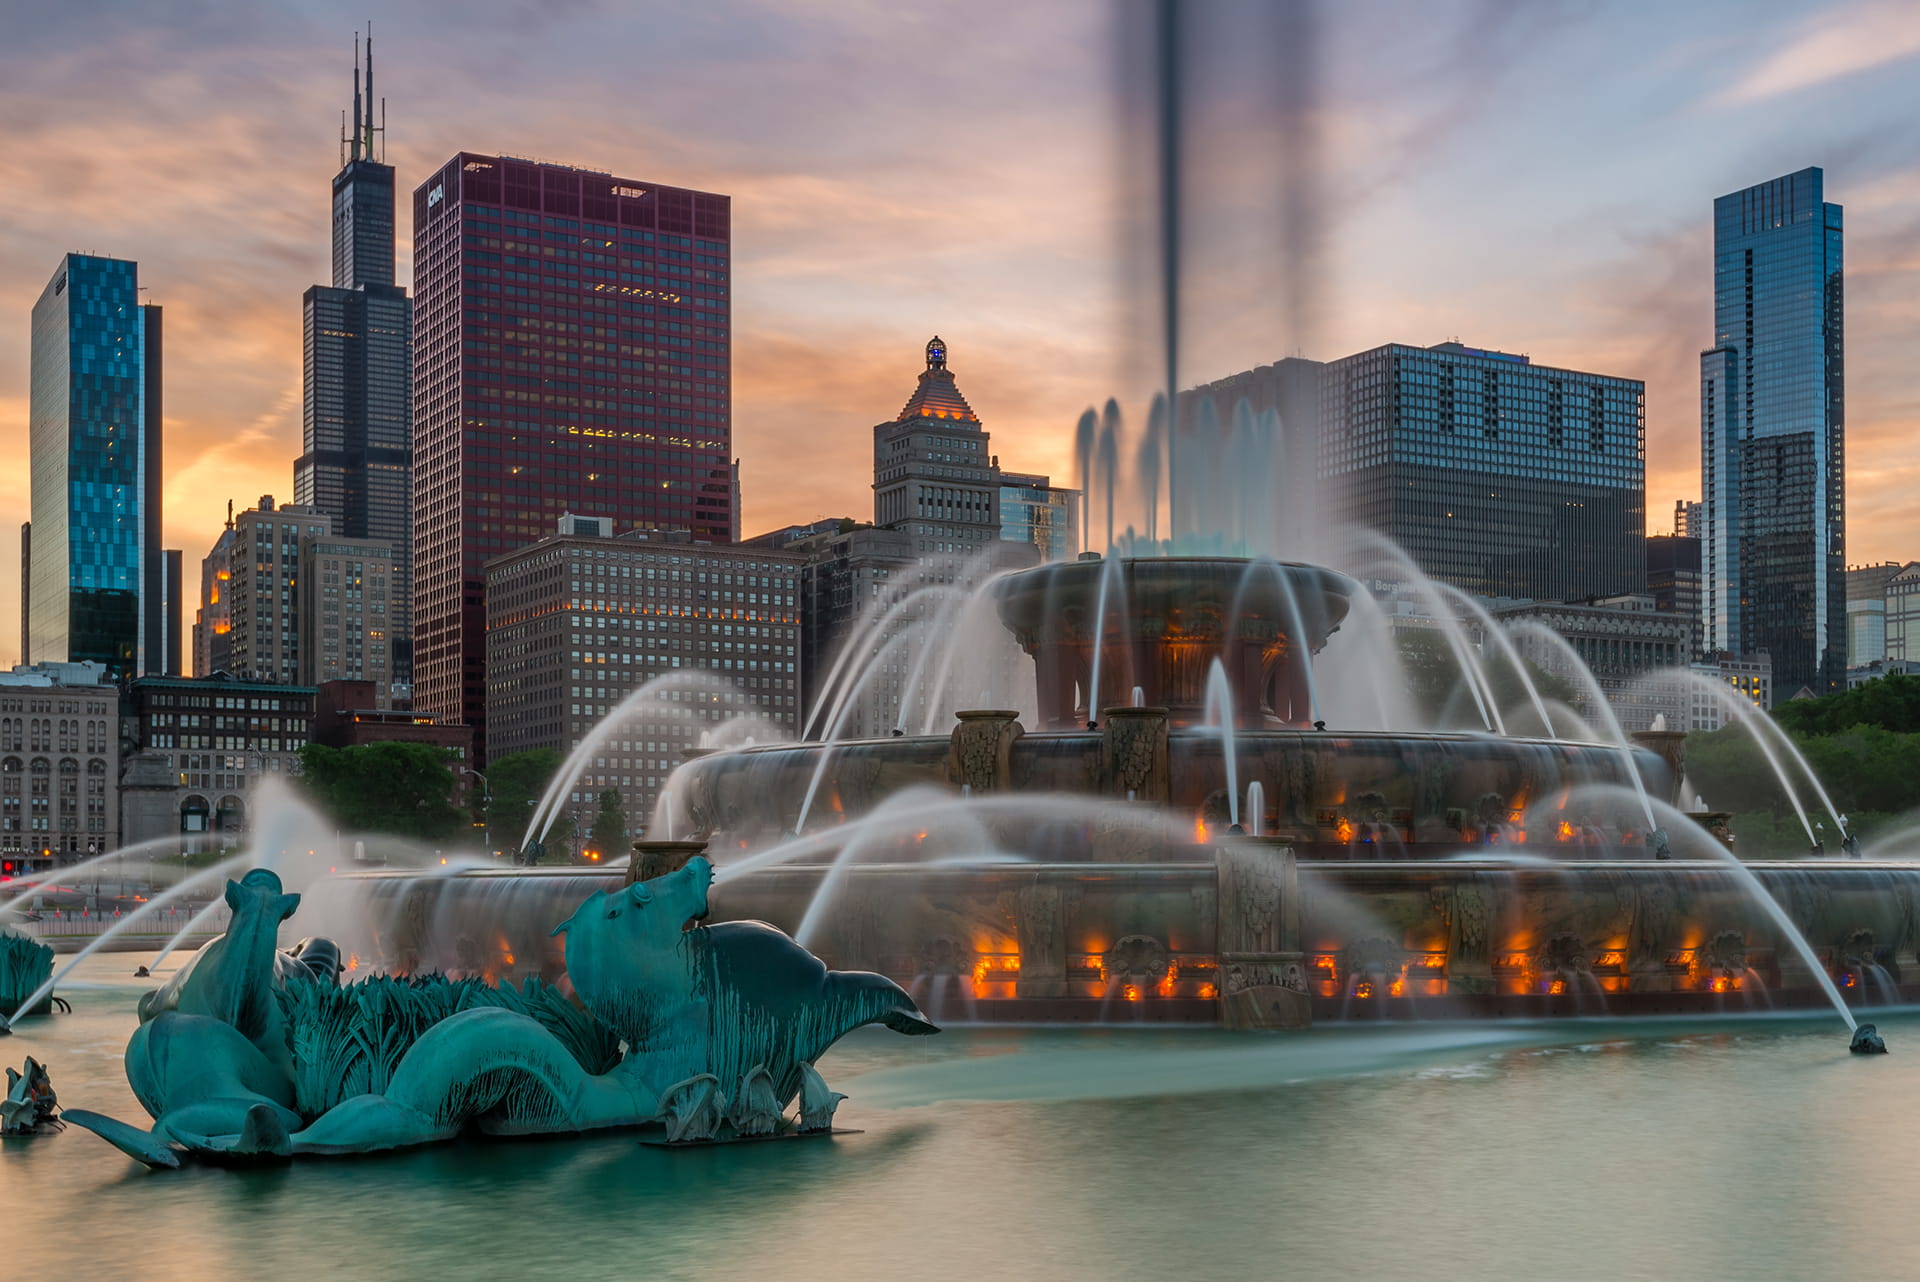 Chicago, Buckingham Fountain and skyscrapers against evening sky